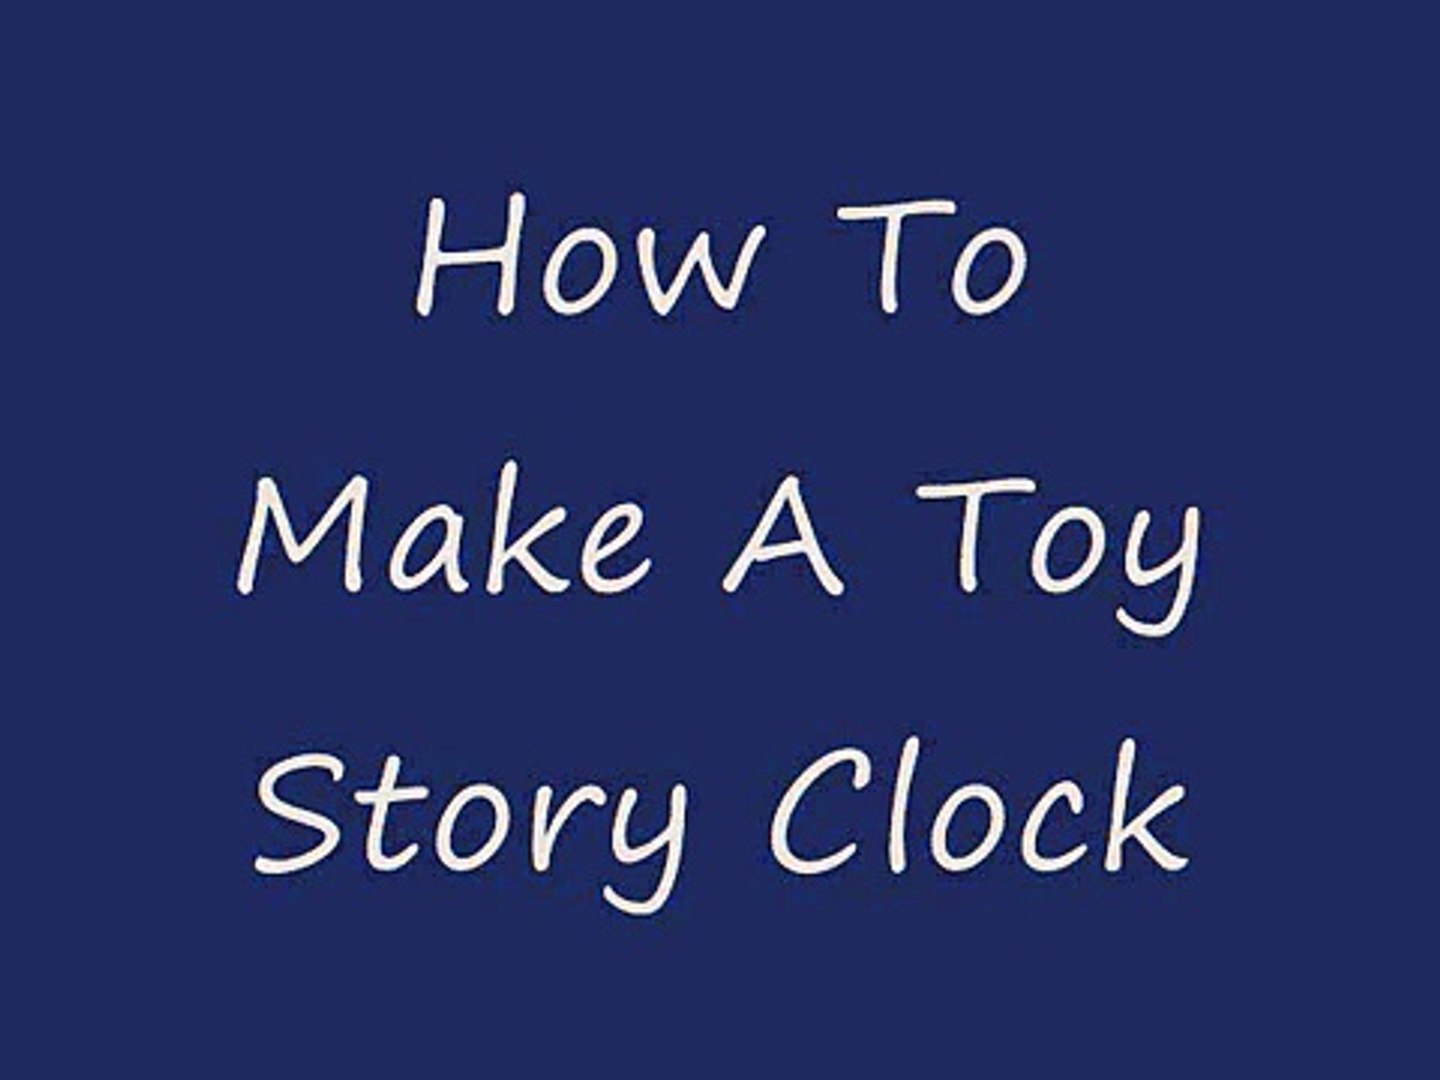 Toy Story clock